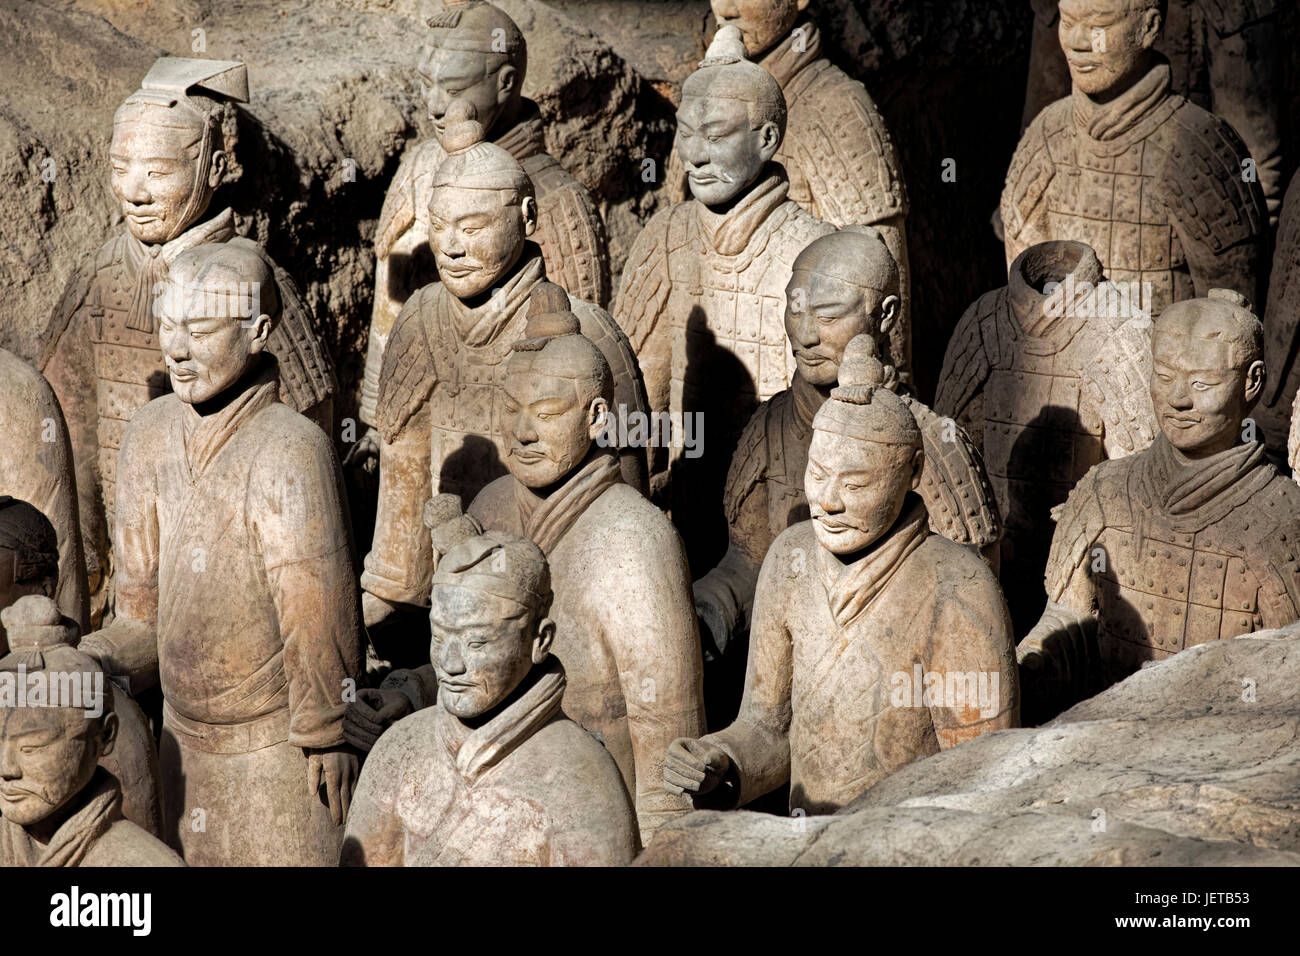 The world famous Terracotta Army, part of the Mausoleum of the First Qin Emperor and a UNESCO World Heritage Site located in Xian China Stock Photo